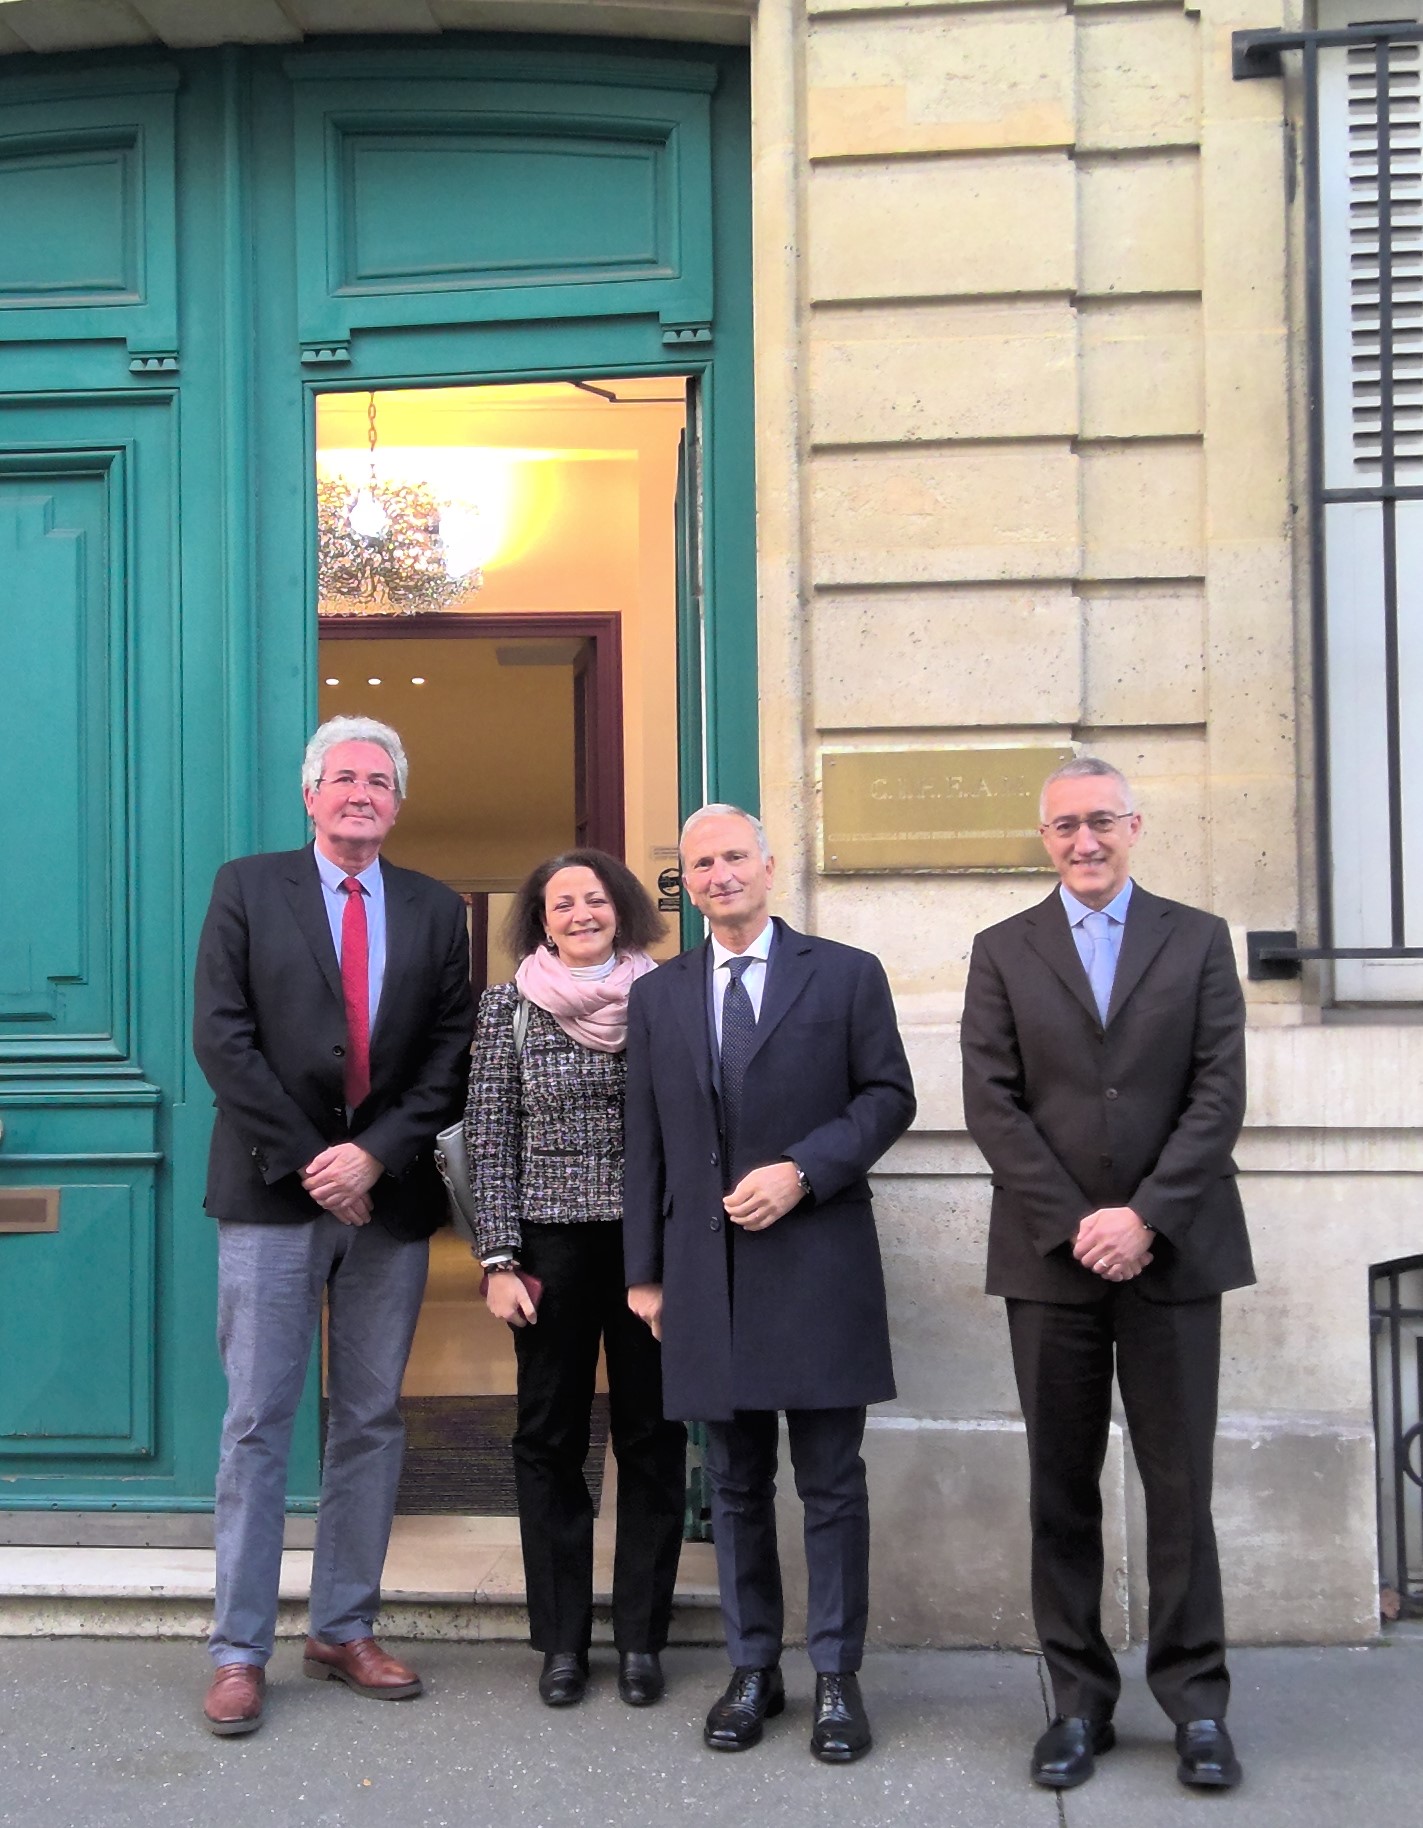 THE CIHEAM WELCOMES  THE PERMANENT REPRESENTATIVE OF ITALY TO INTERNATIONAL ORGANISATIONS IN PARIS